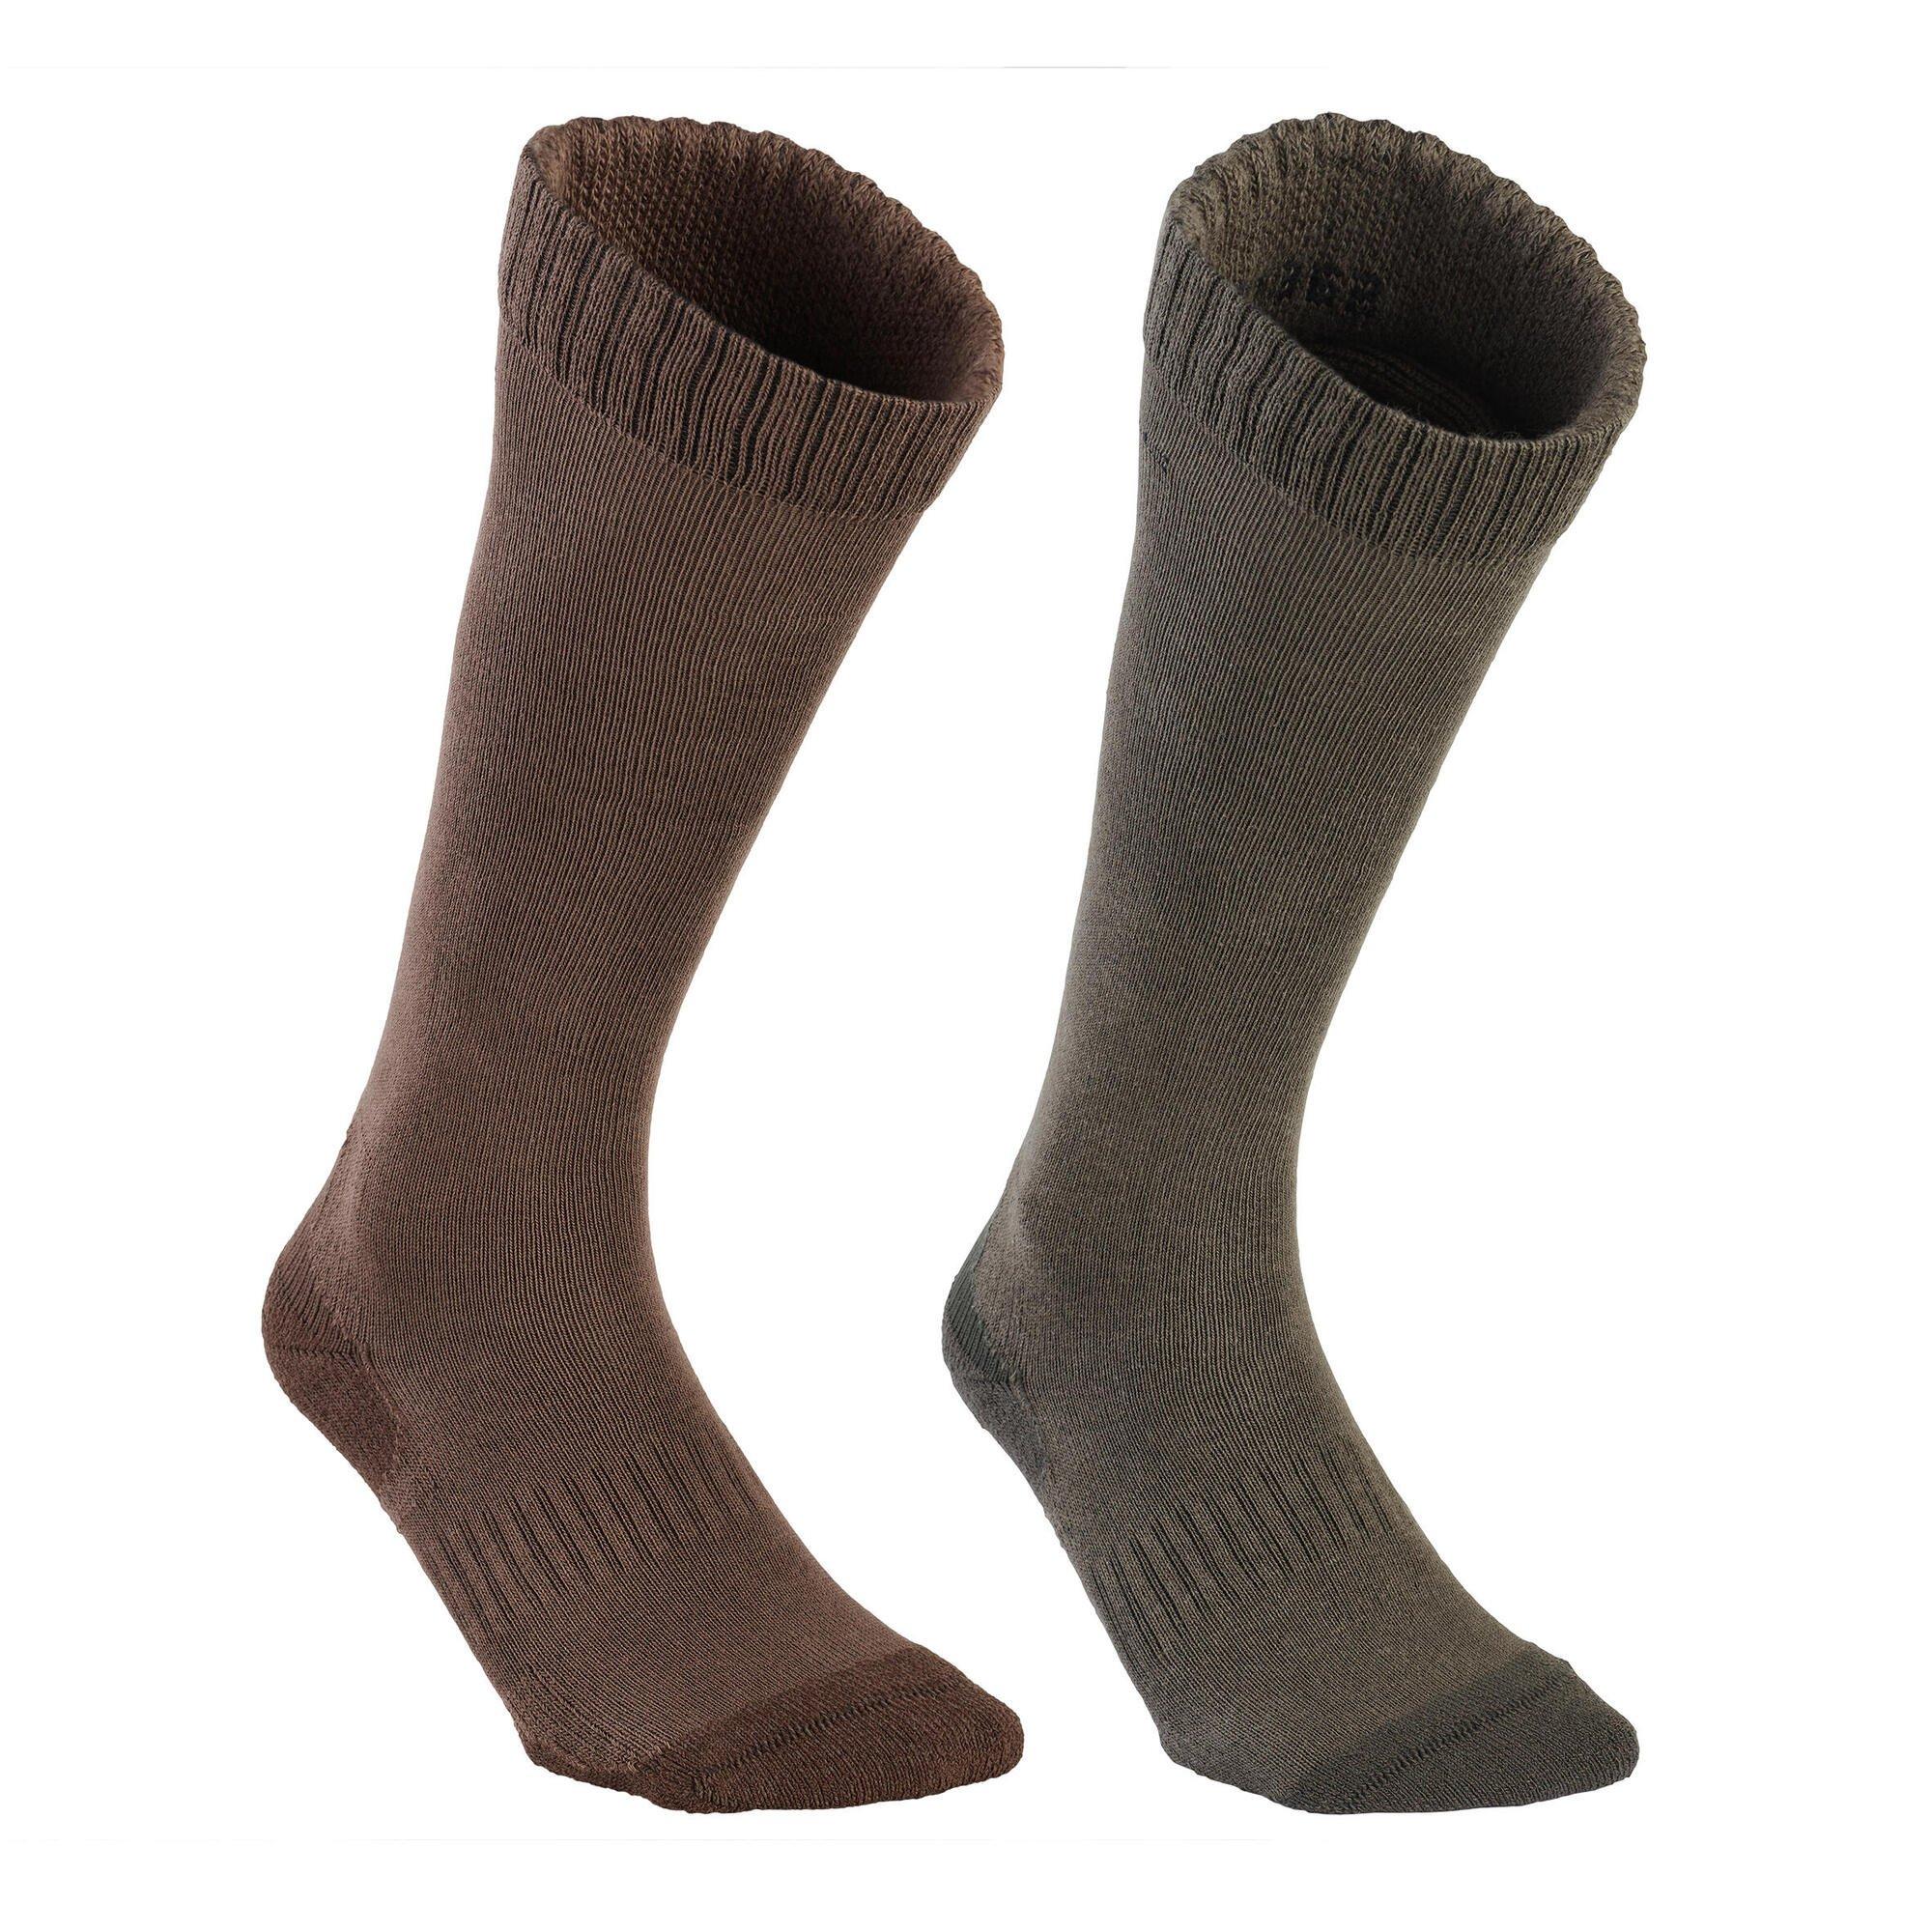 Decathlon Pack Of 2 Pairs Of Breathable Tall Country Sport Socks 100